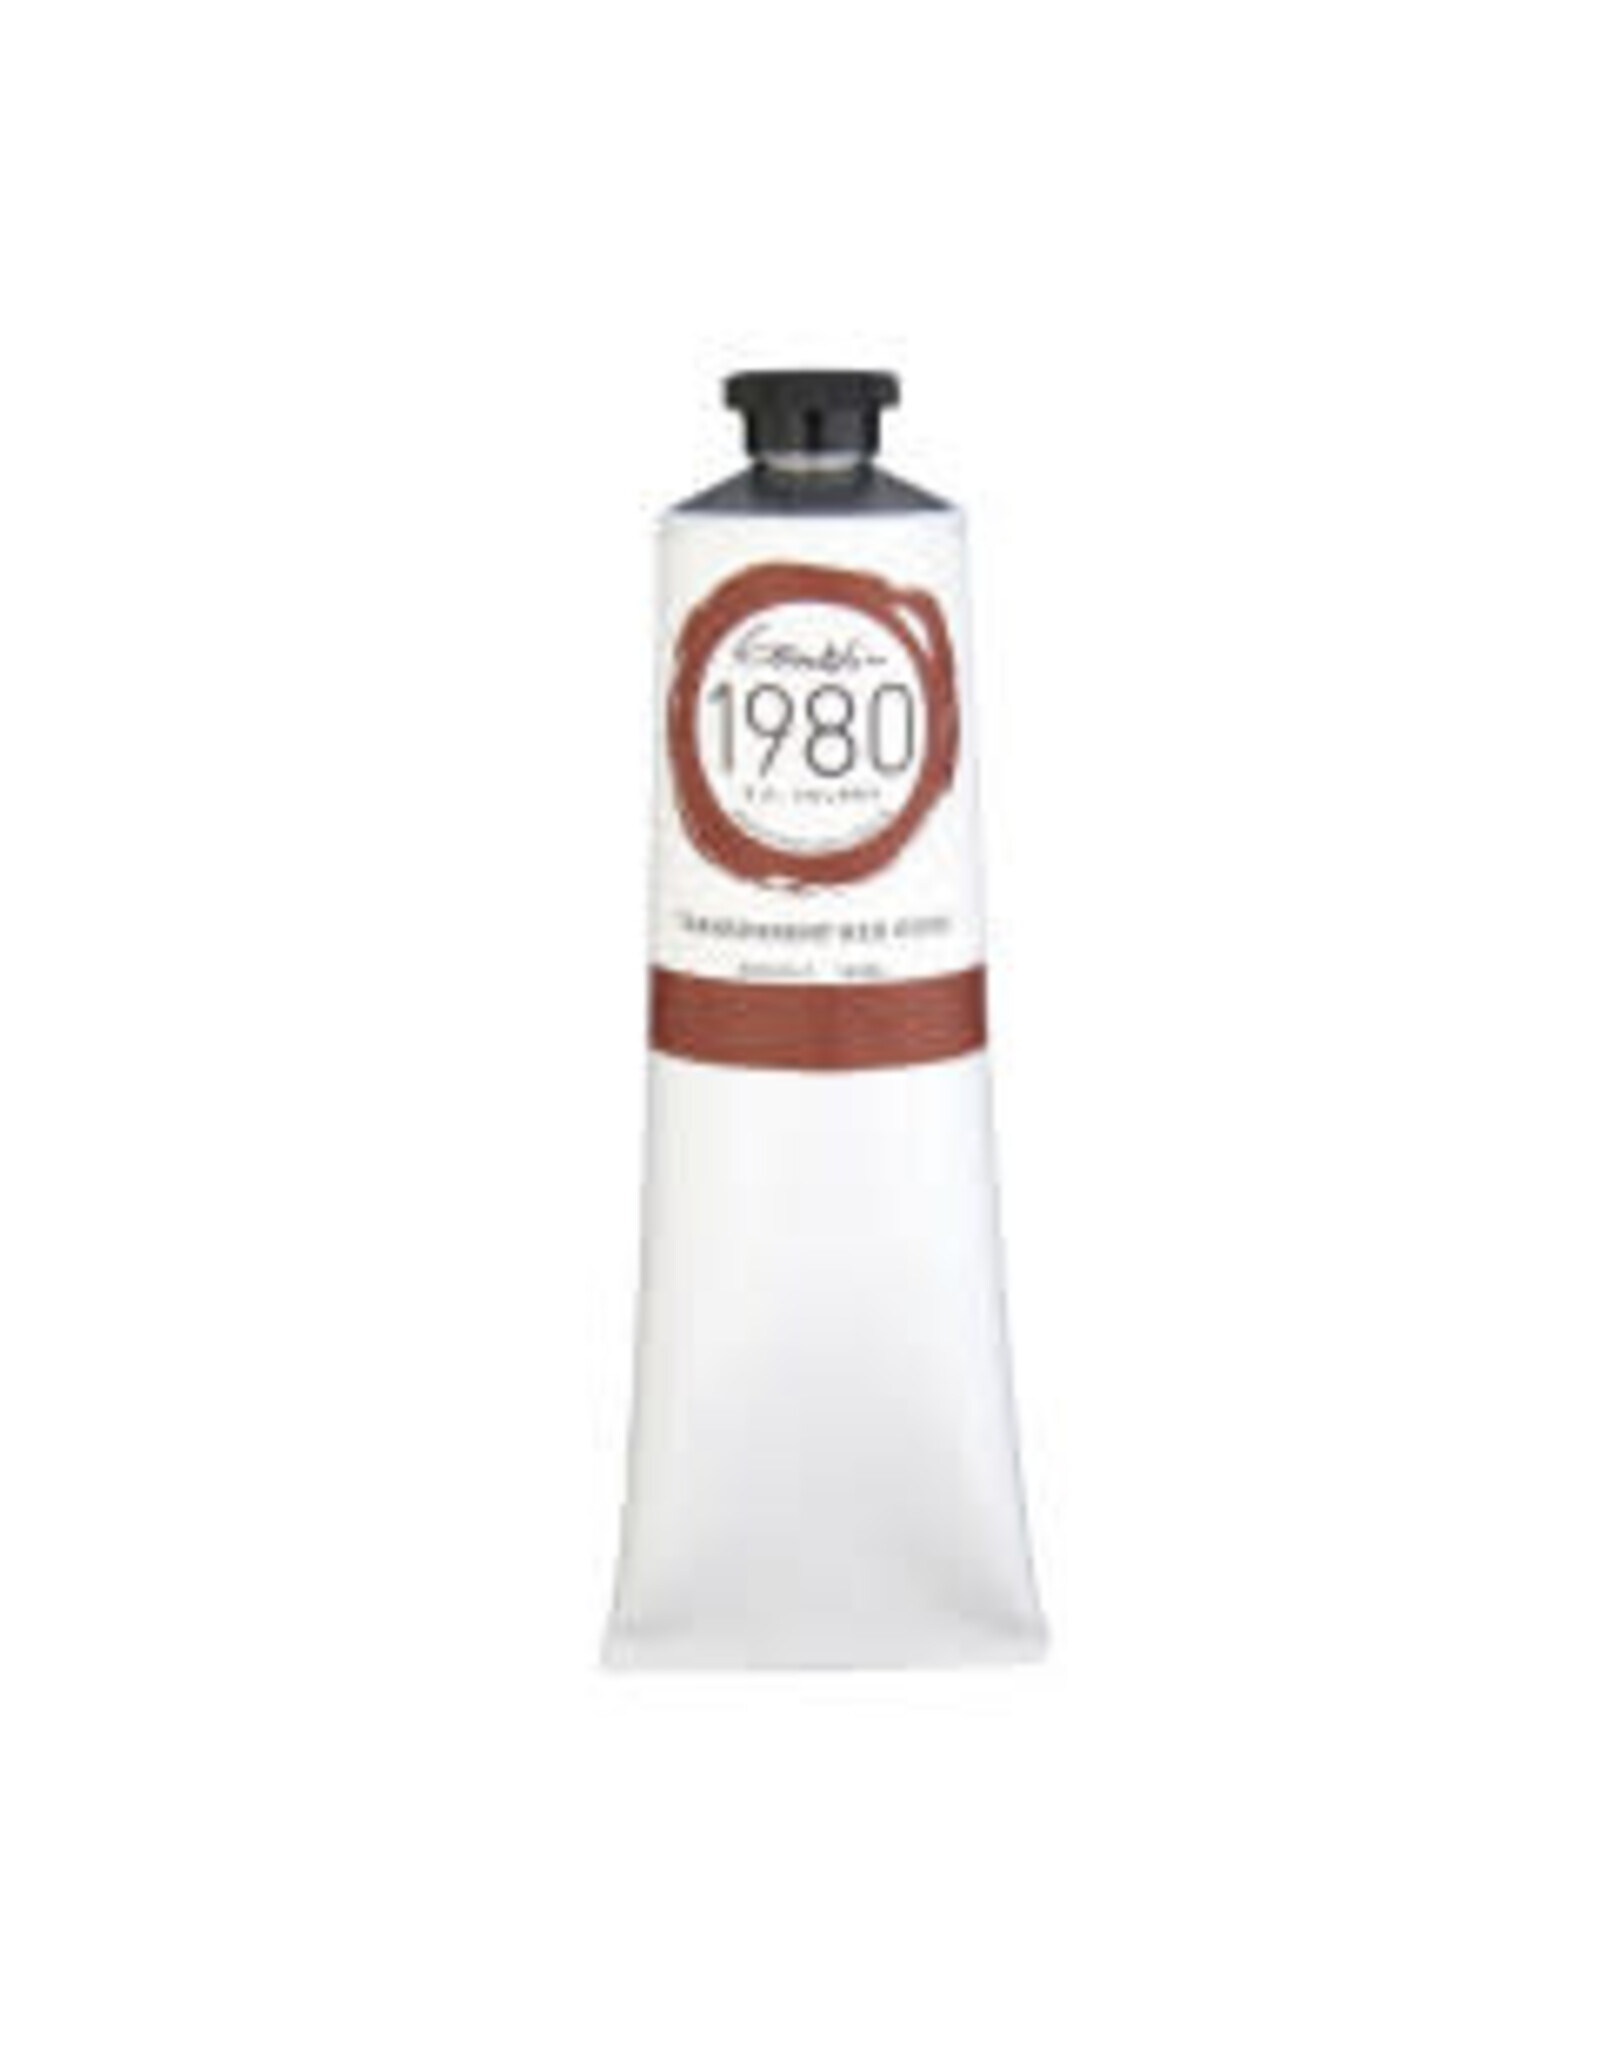 CLEARANCE DENTED TUBE Gamblin 1980 Oil Paint, Transparent Red Oxide, 150ml